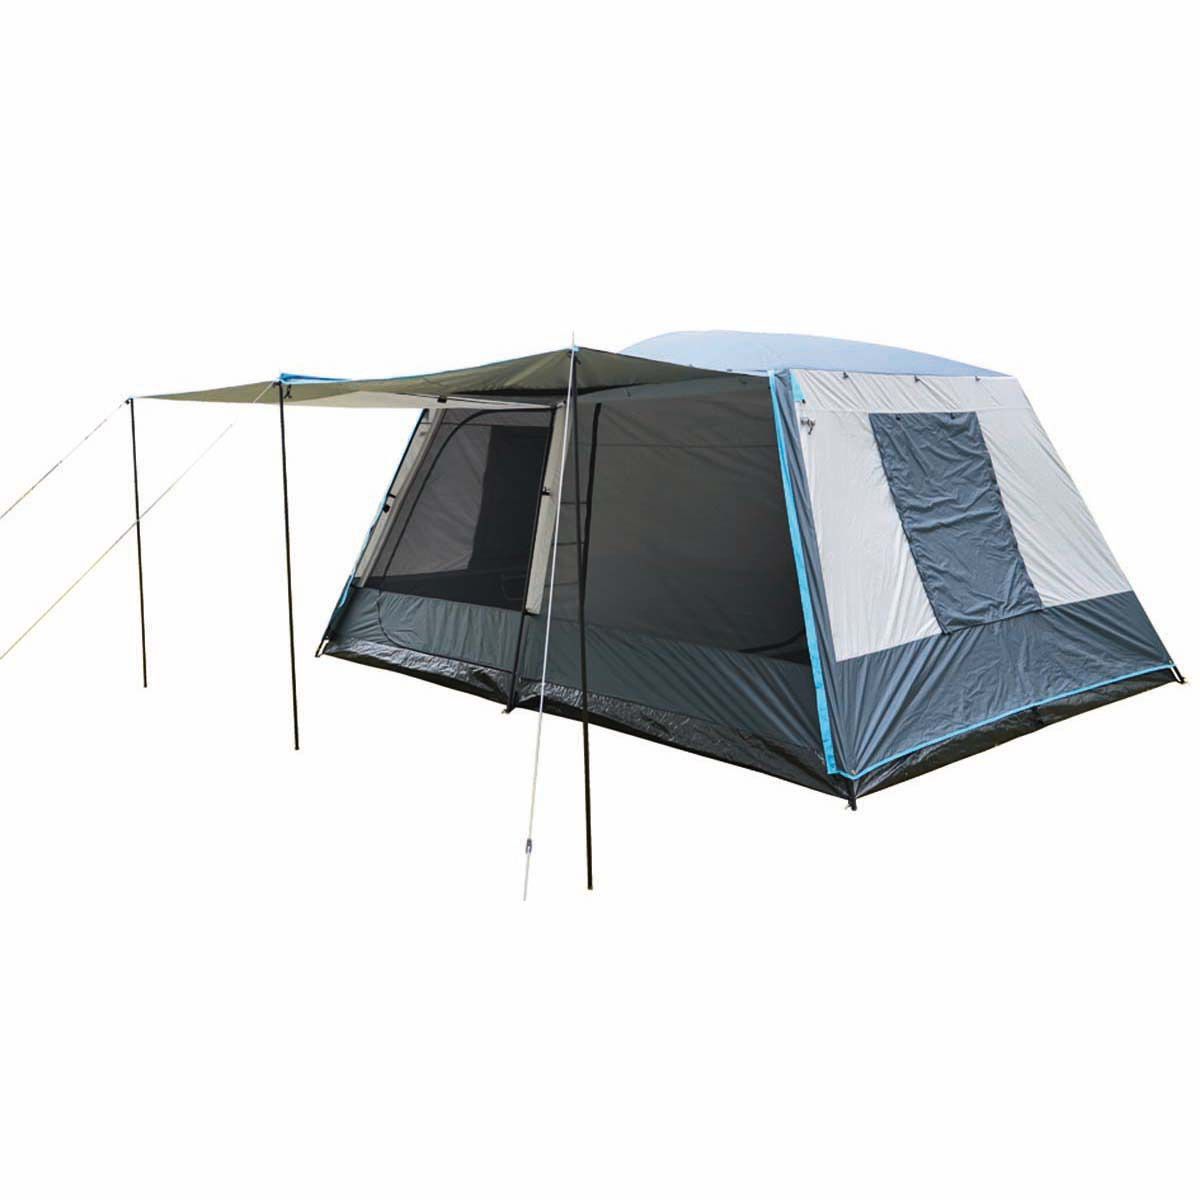 oztrail dome tent instructions